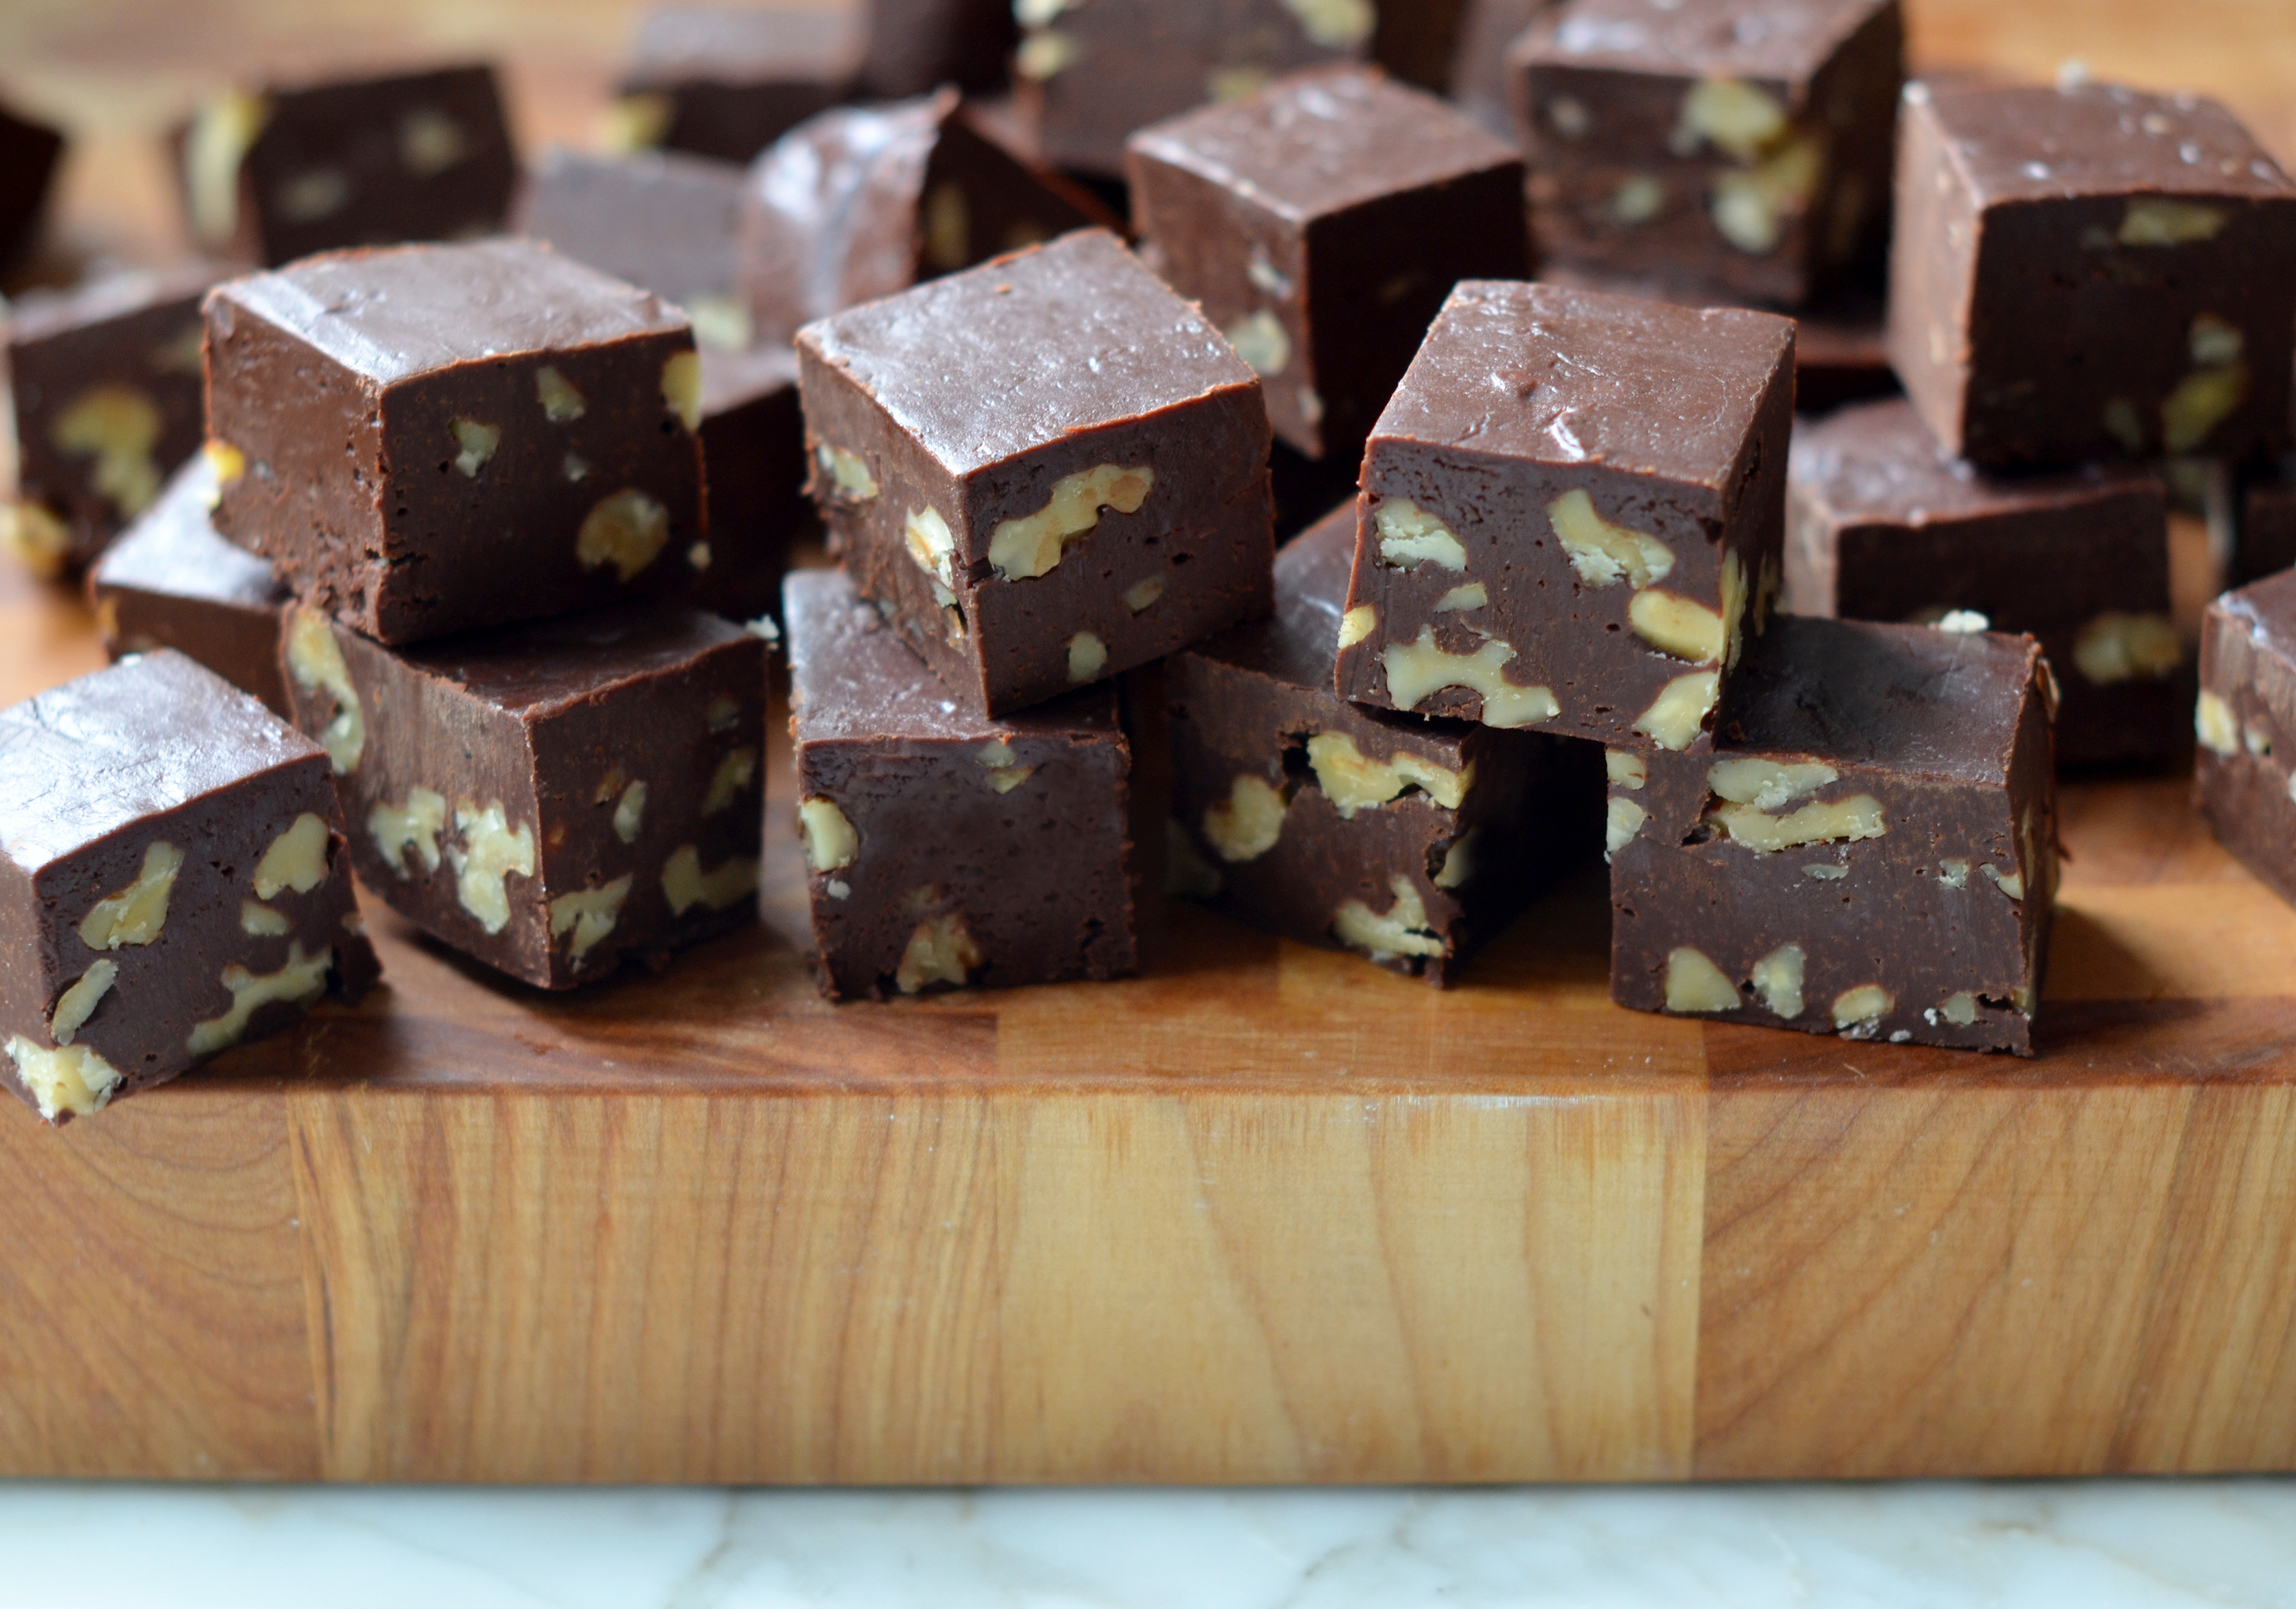 How to Make Fudge That Is as Decadent as the Store-Bought Kind